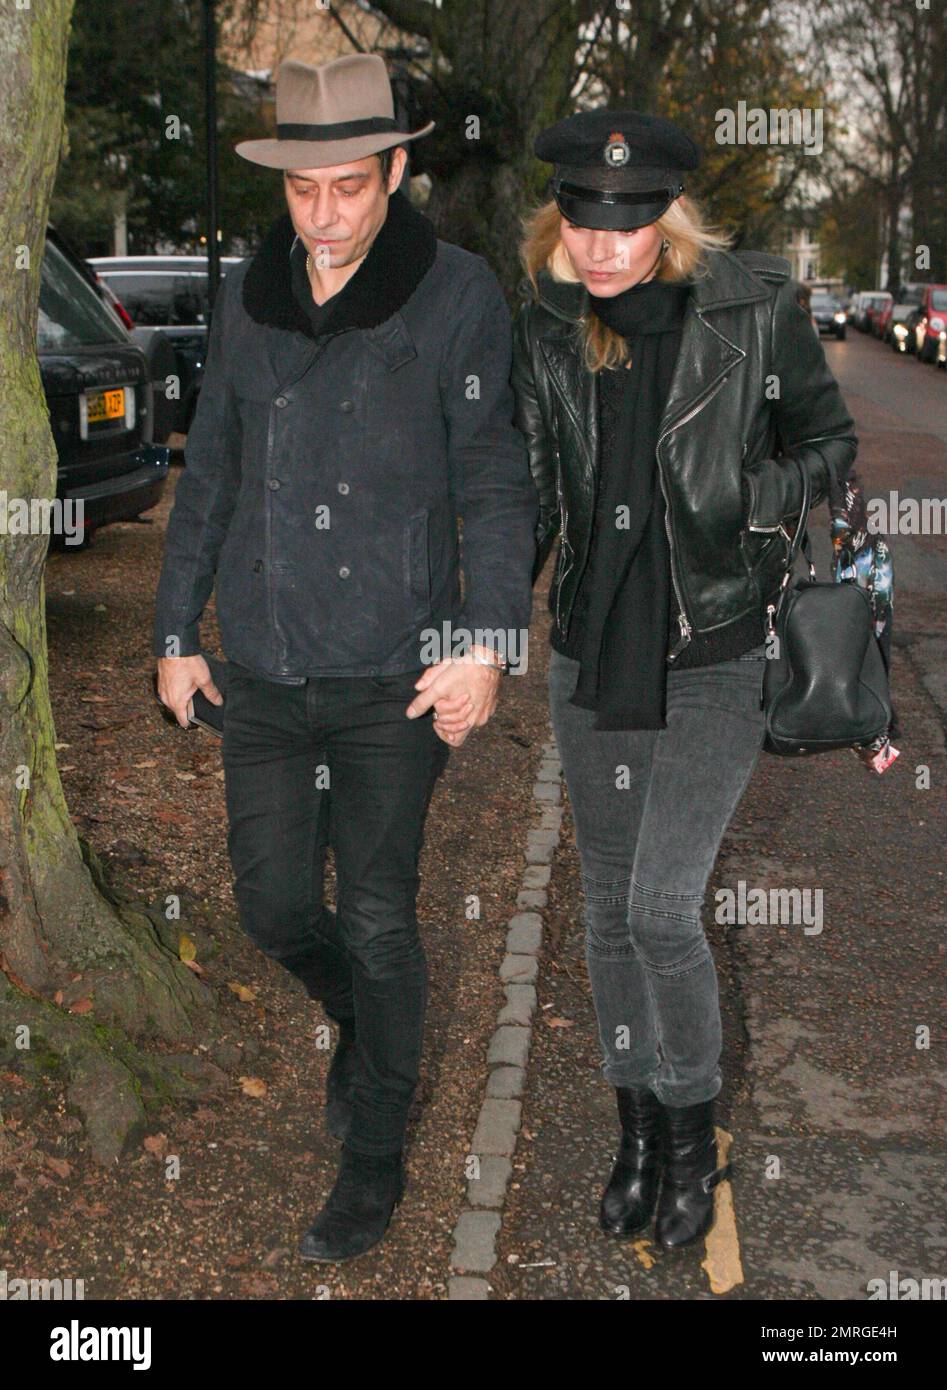 Supermodel Kate Moss and rocker husband Jamie Hince of 'The Kills' were seen walking hand in hand as they arrived at their new home in Hampstead. Its been reported that Kate paid out an estimated $30,000 at The Hoping Foundation Benefit to hear Boy George sing her favorite song. Kate got up from her table and joined Boy George in singing 'Do You Really Want To Hurt Me,' after shelling out the money for the privilege. London, UK. 23rd November 2011. Stock Photo